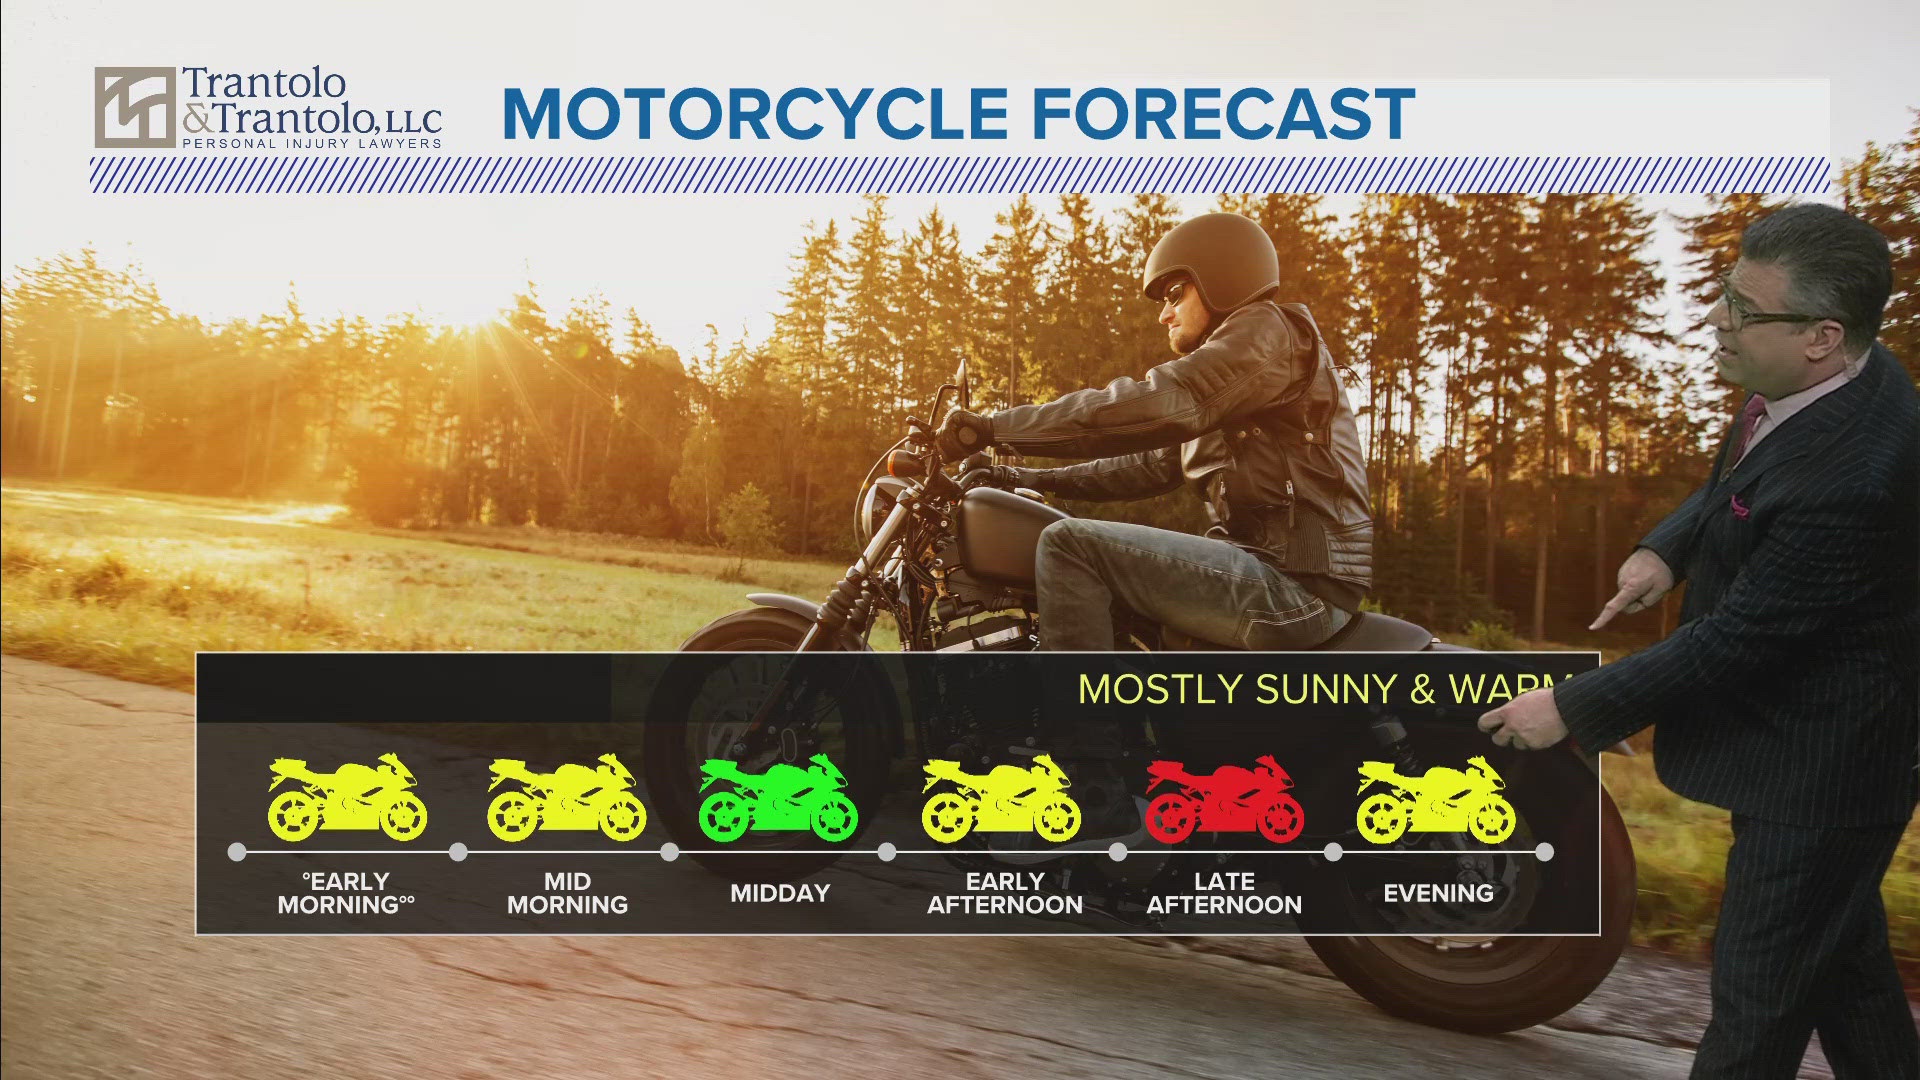 FOX61 Meteorologist Matt Scott gives an update on Connecticut's motorcycle forecast for today.